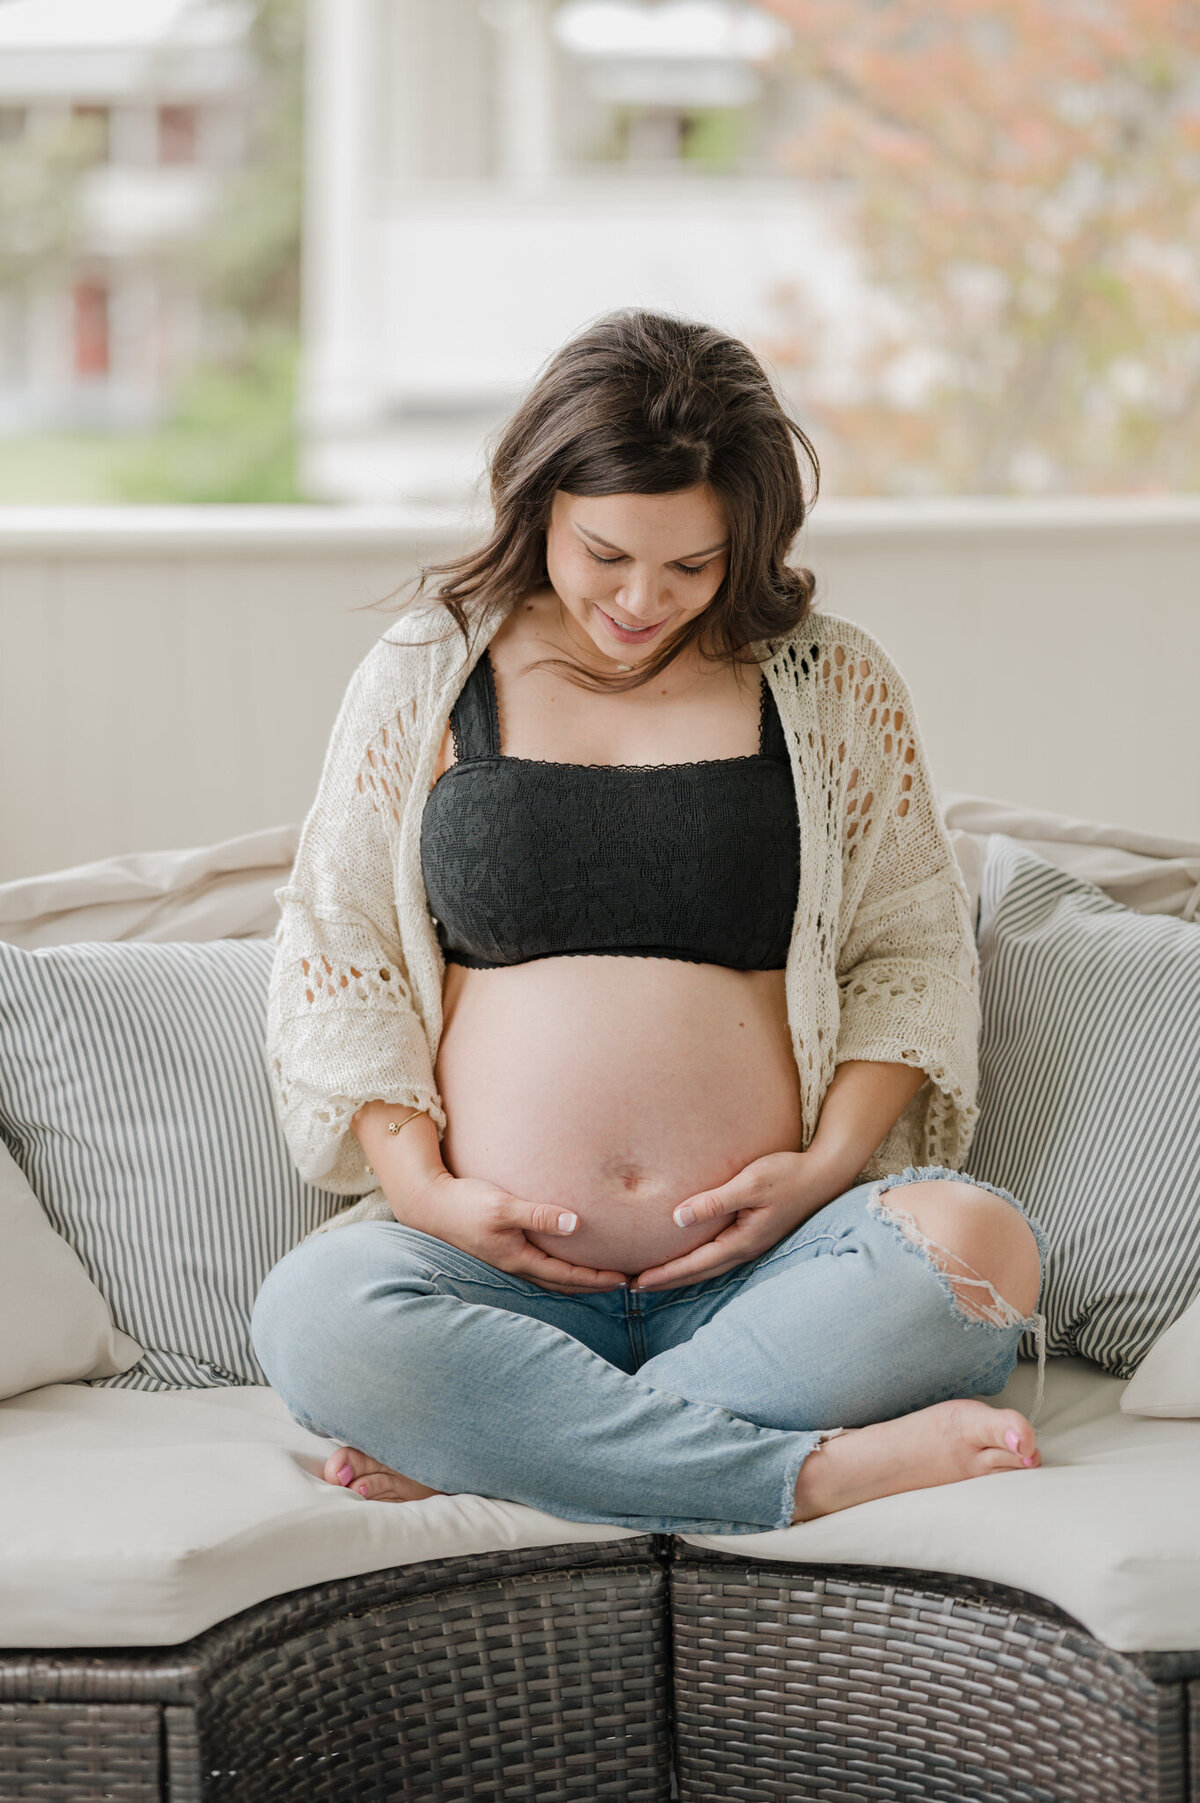 Expecting mom in jeans and an open cardigan sits cross-legged and gazes down at her belly.